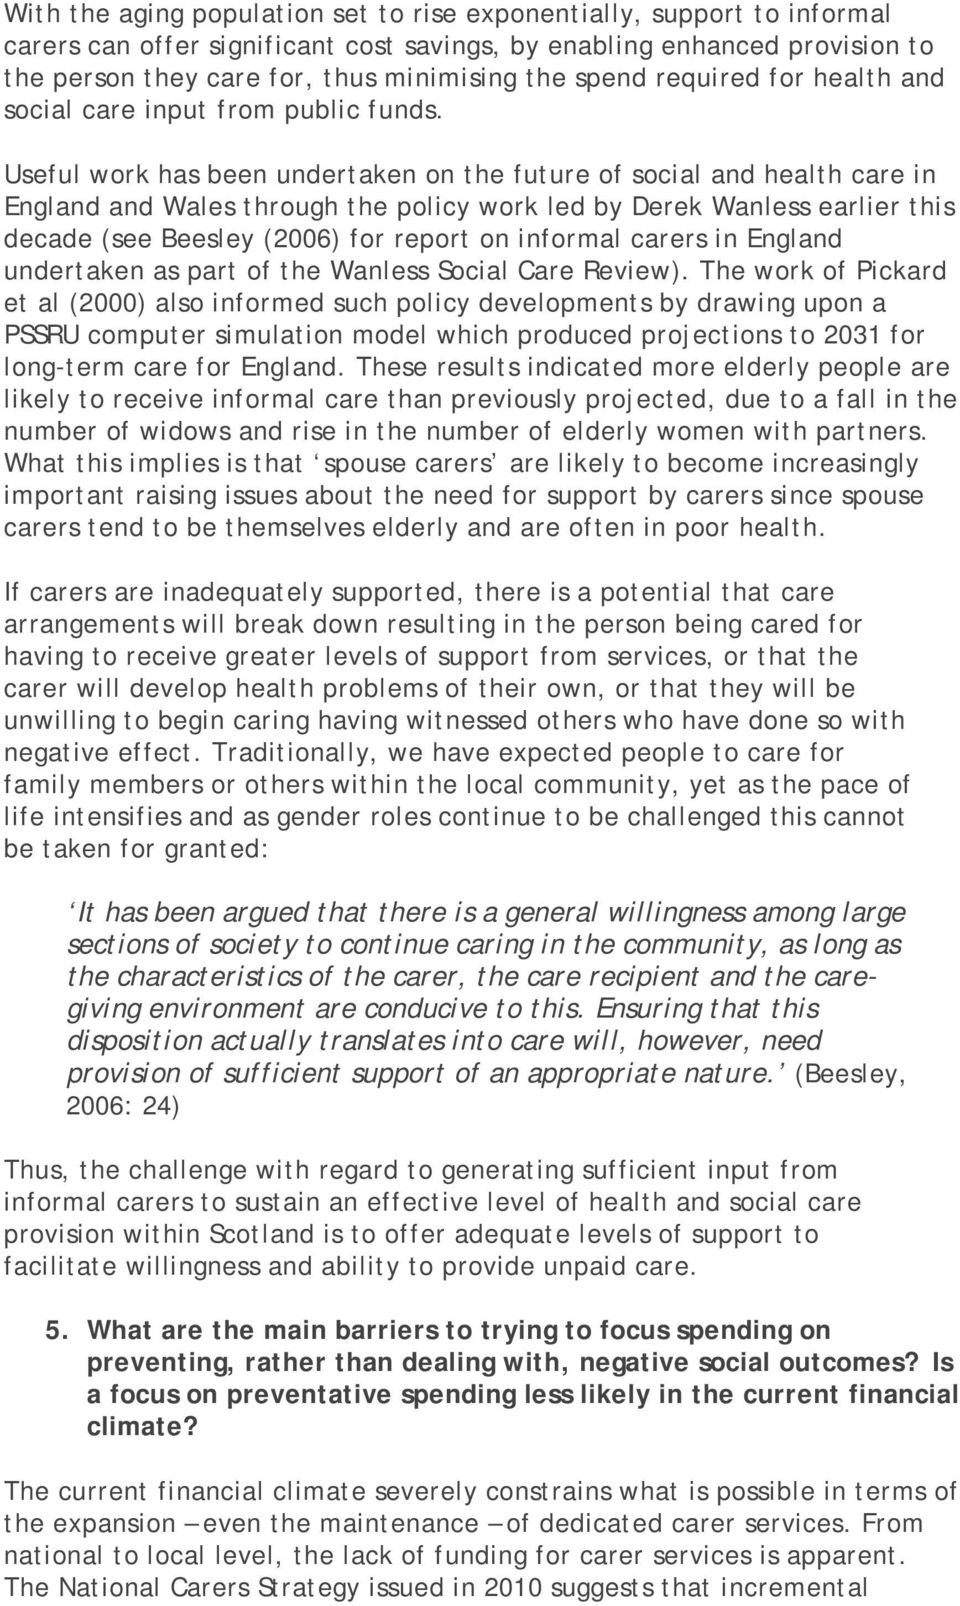 Useful work has been undertaken on the future of social and health care in England and Wales through the policy work led by Derek Wanless earlier this decade (see Beesley (2006) for report on